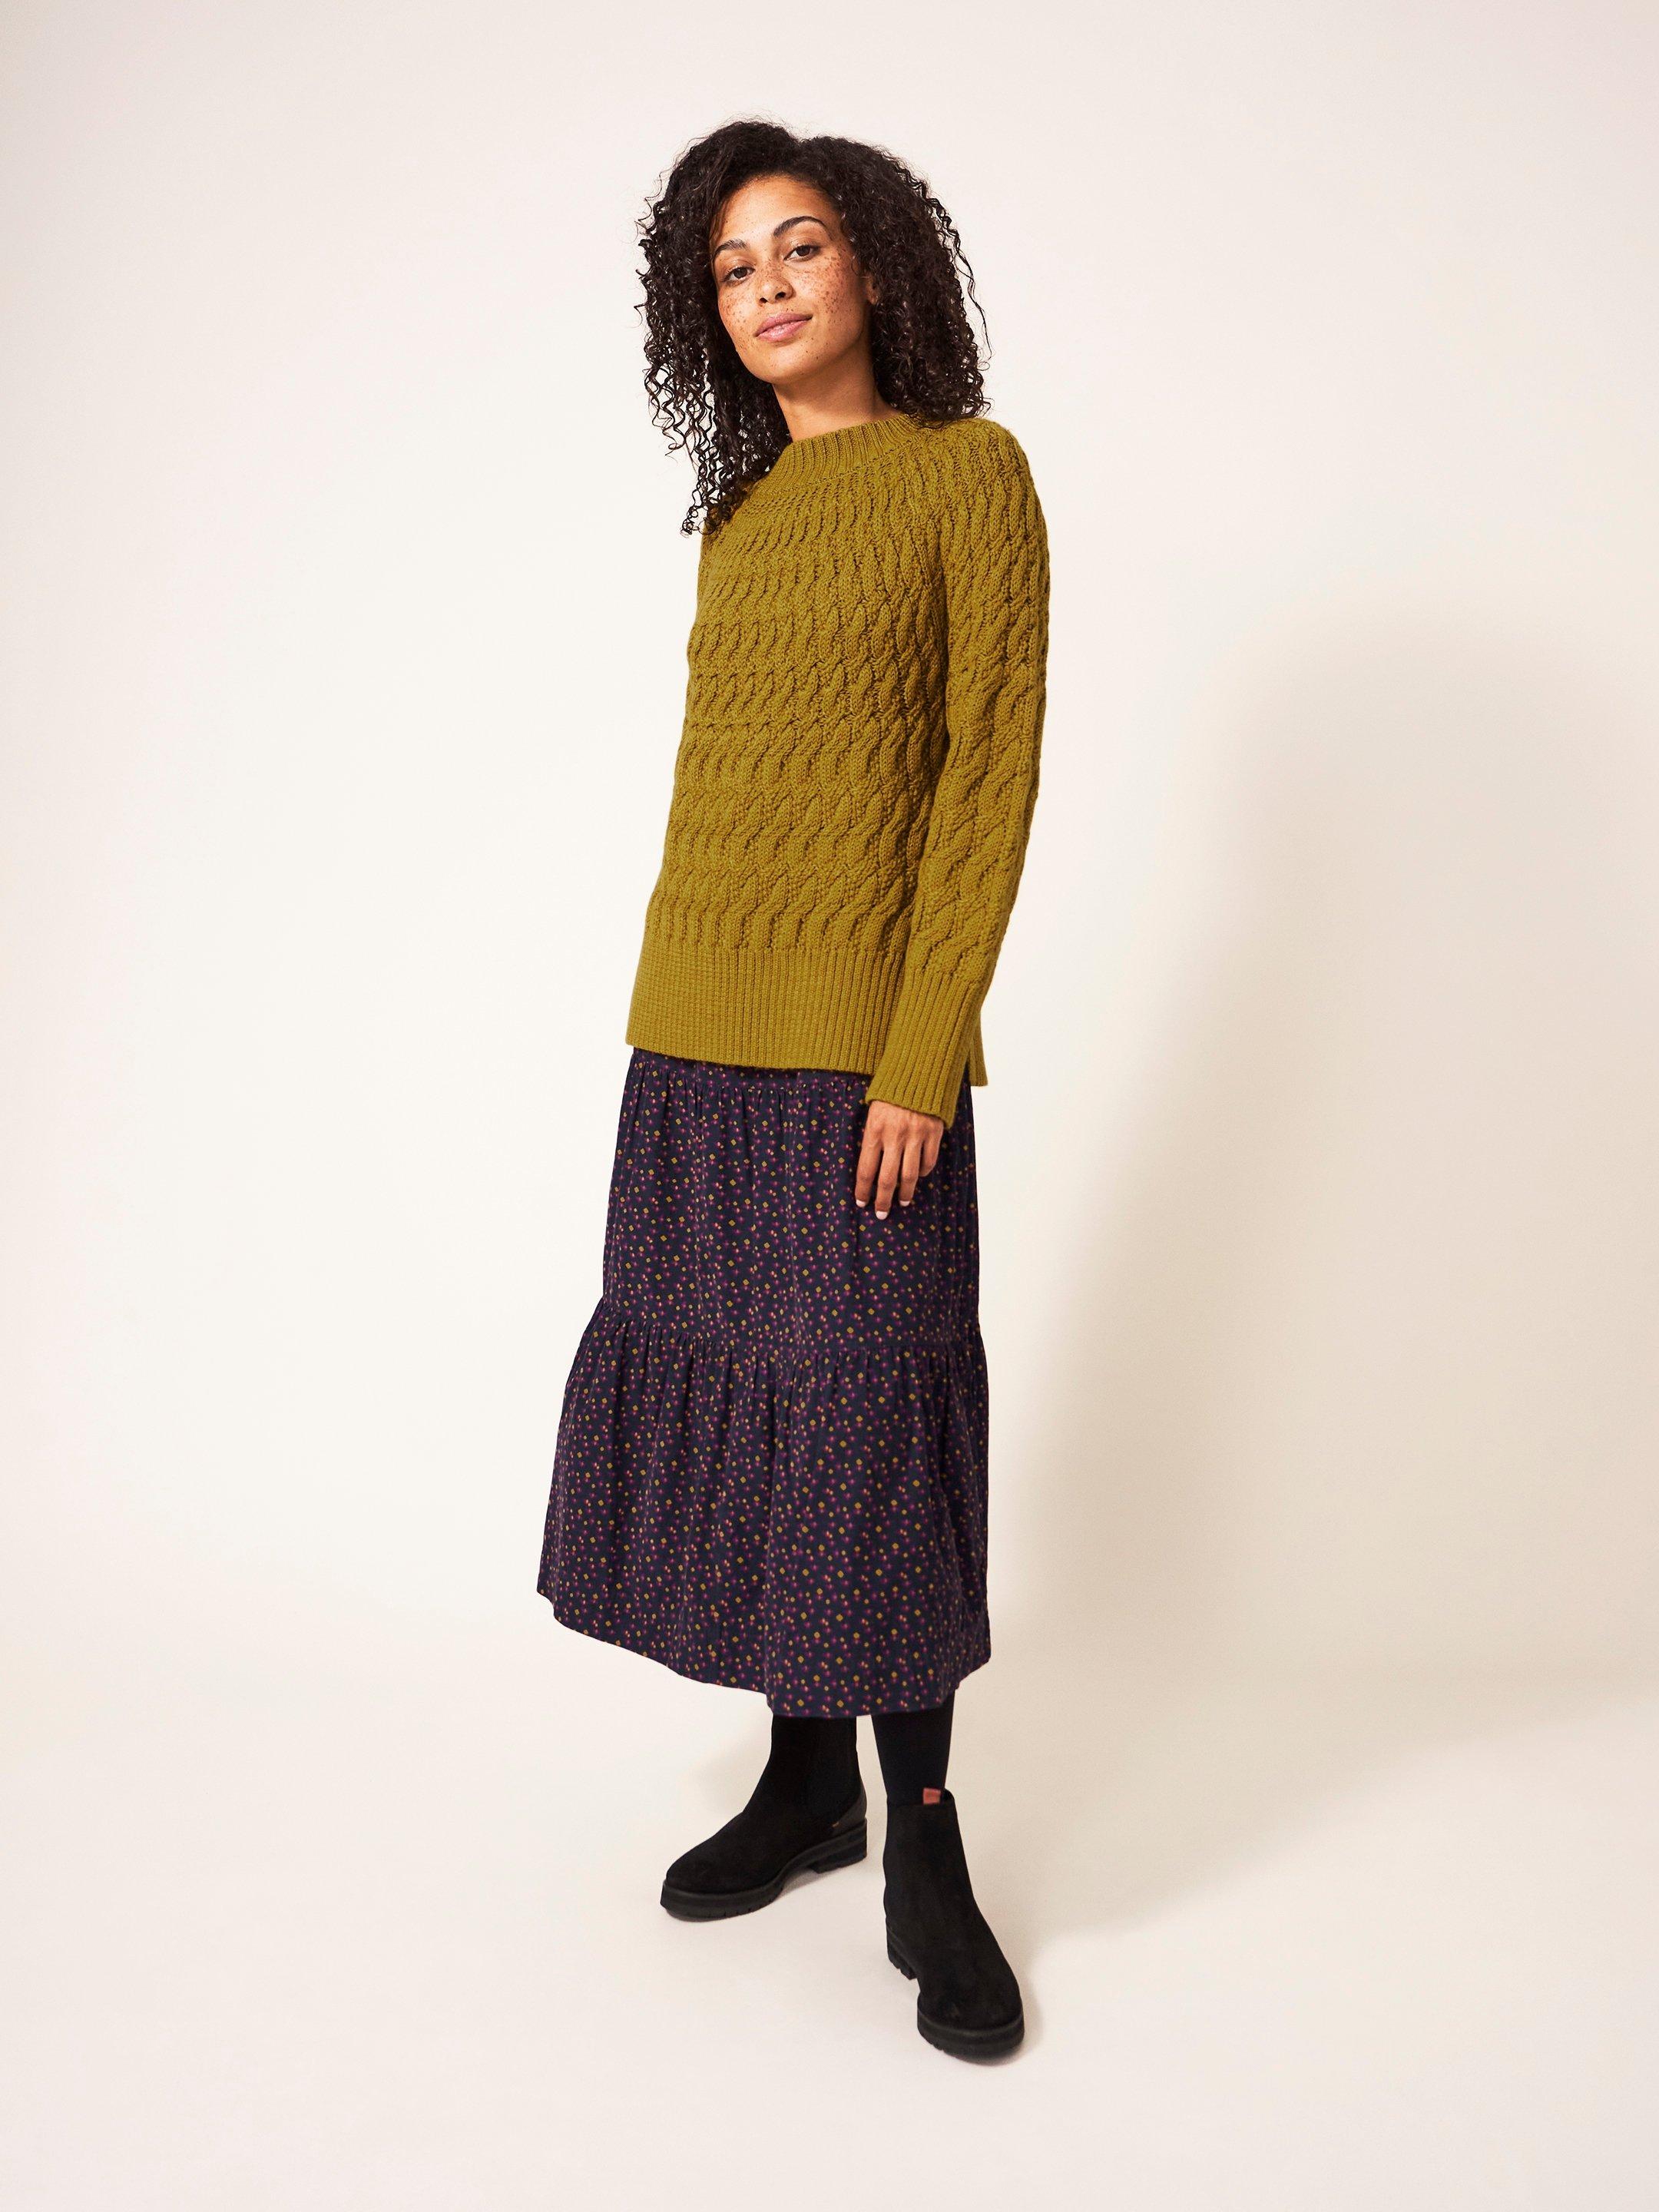 Oak Cable Jumper in DP YELLOW - MODEL FRONT